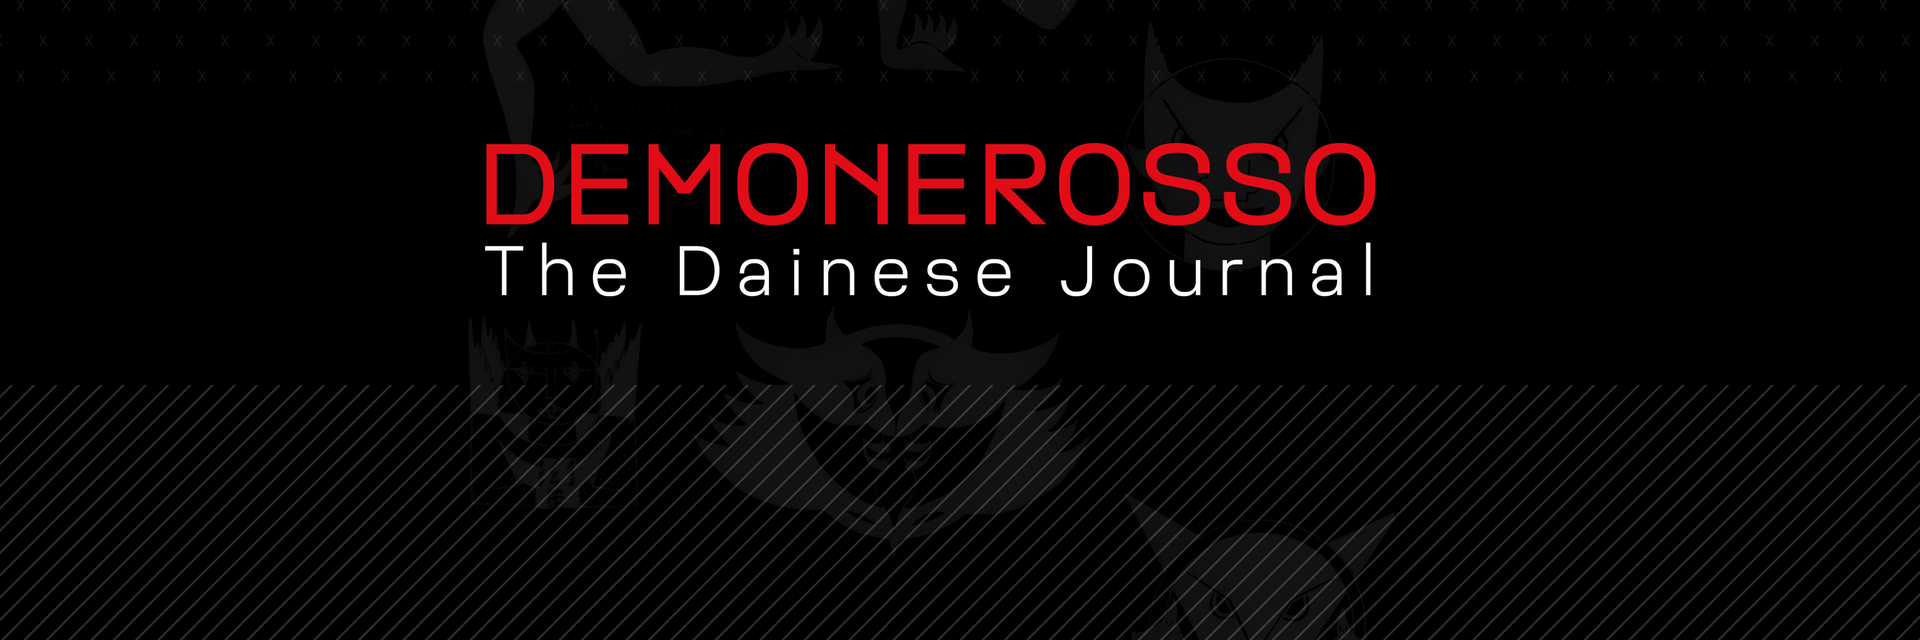 The Dainese Journal